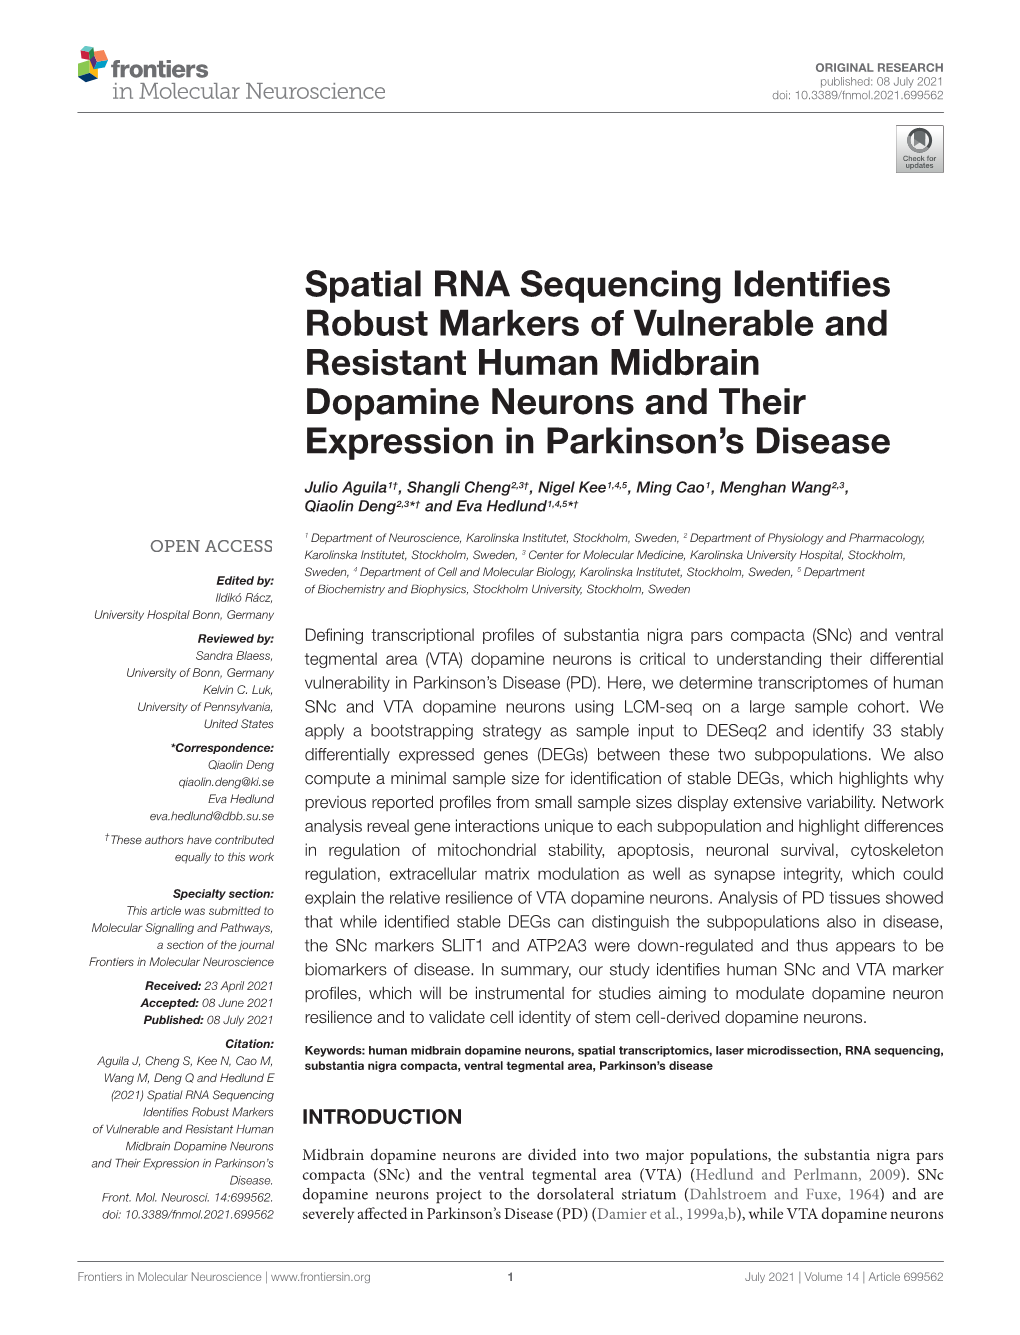 Spatial RNA Sequencing Identifies Robust Markers Of